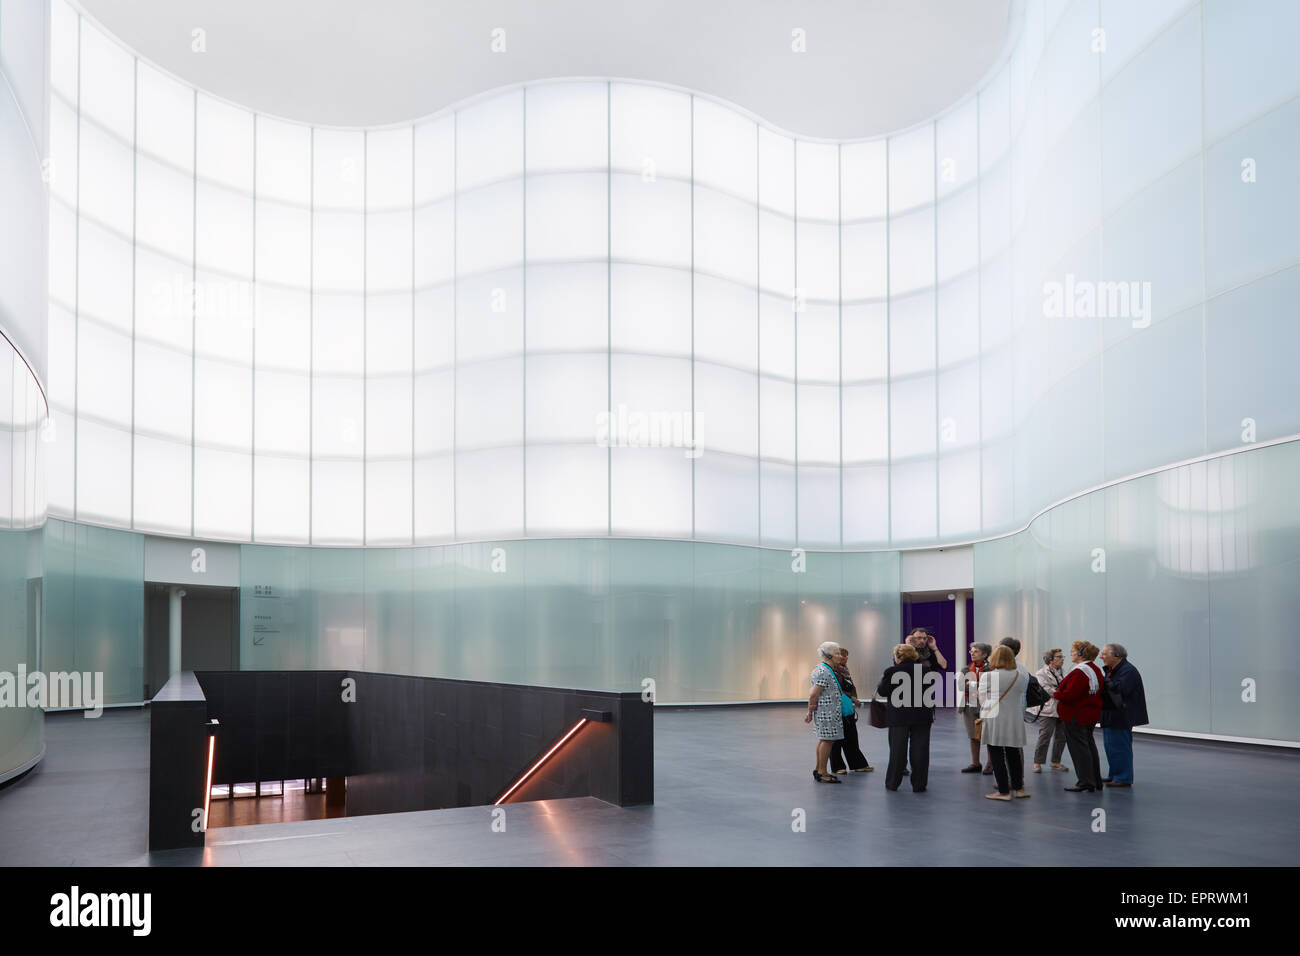 Mudec, Museo delle Culture, ethnographic museum interior with people during Milan design week Stock Photo